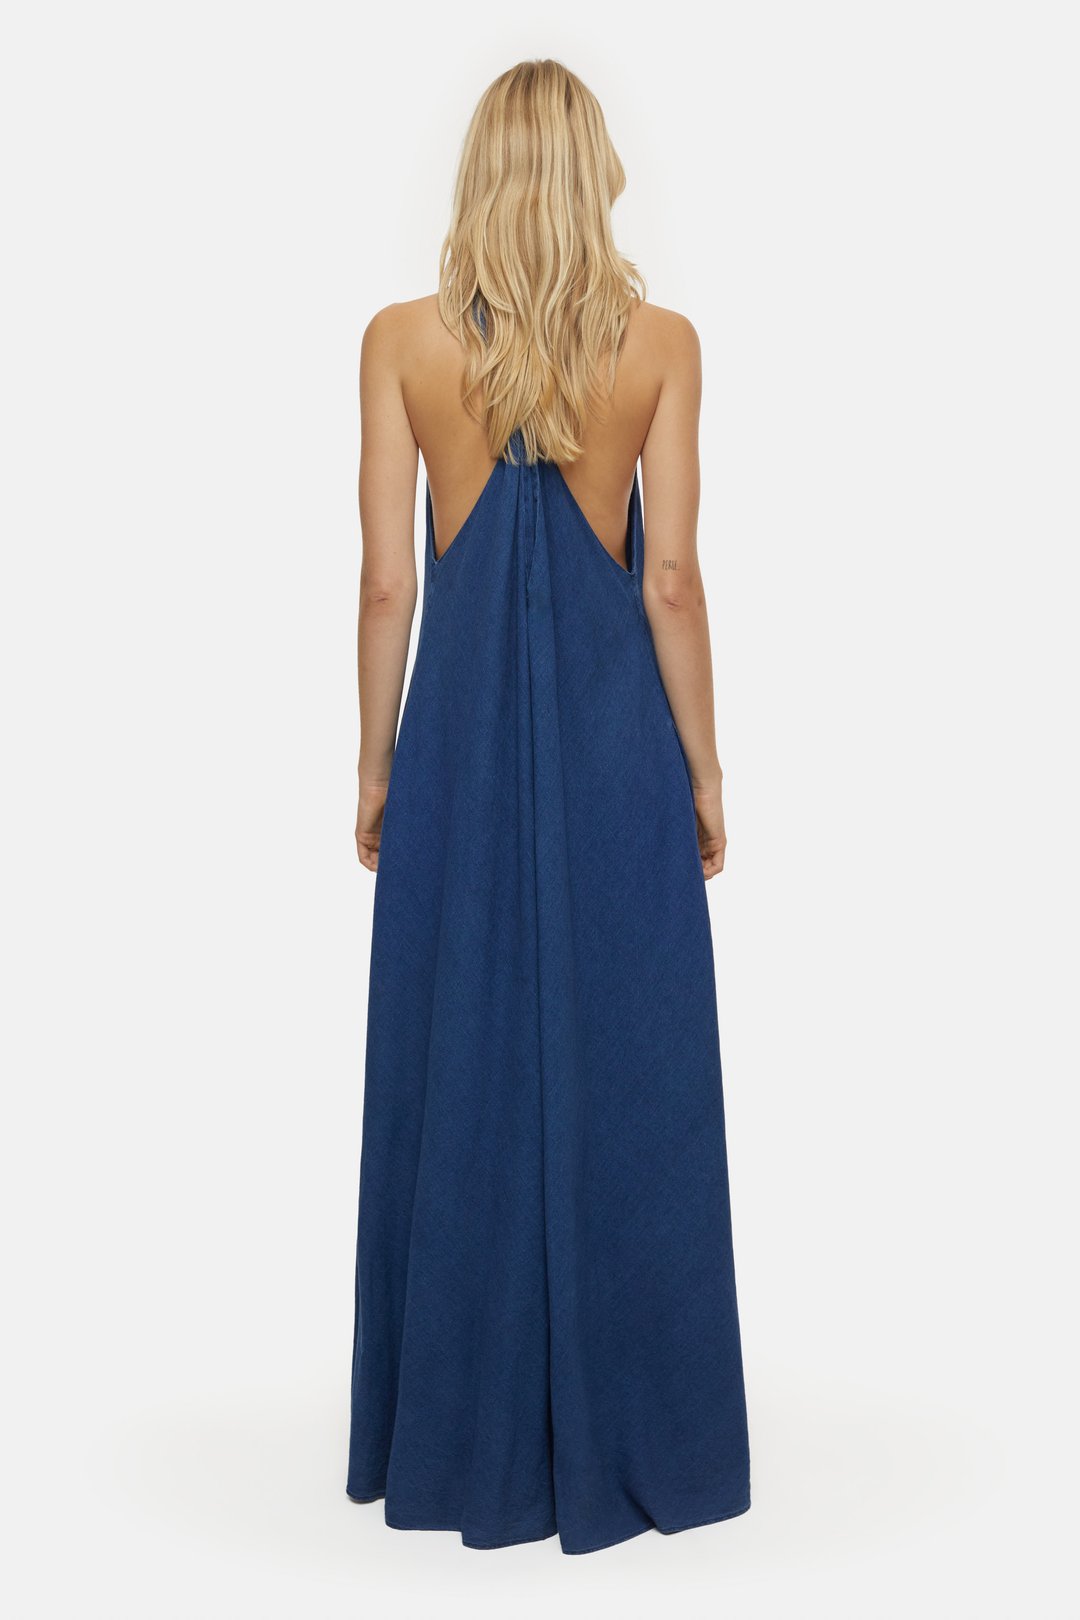 MAXI DRESS KNOTTED STRAPS